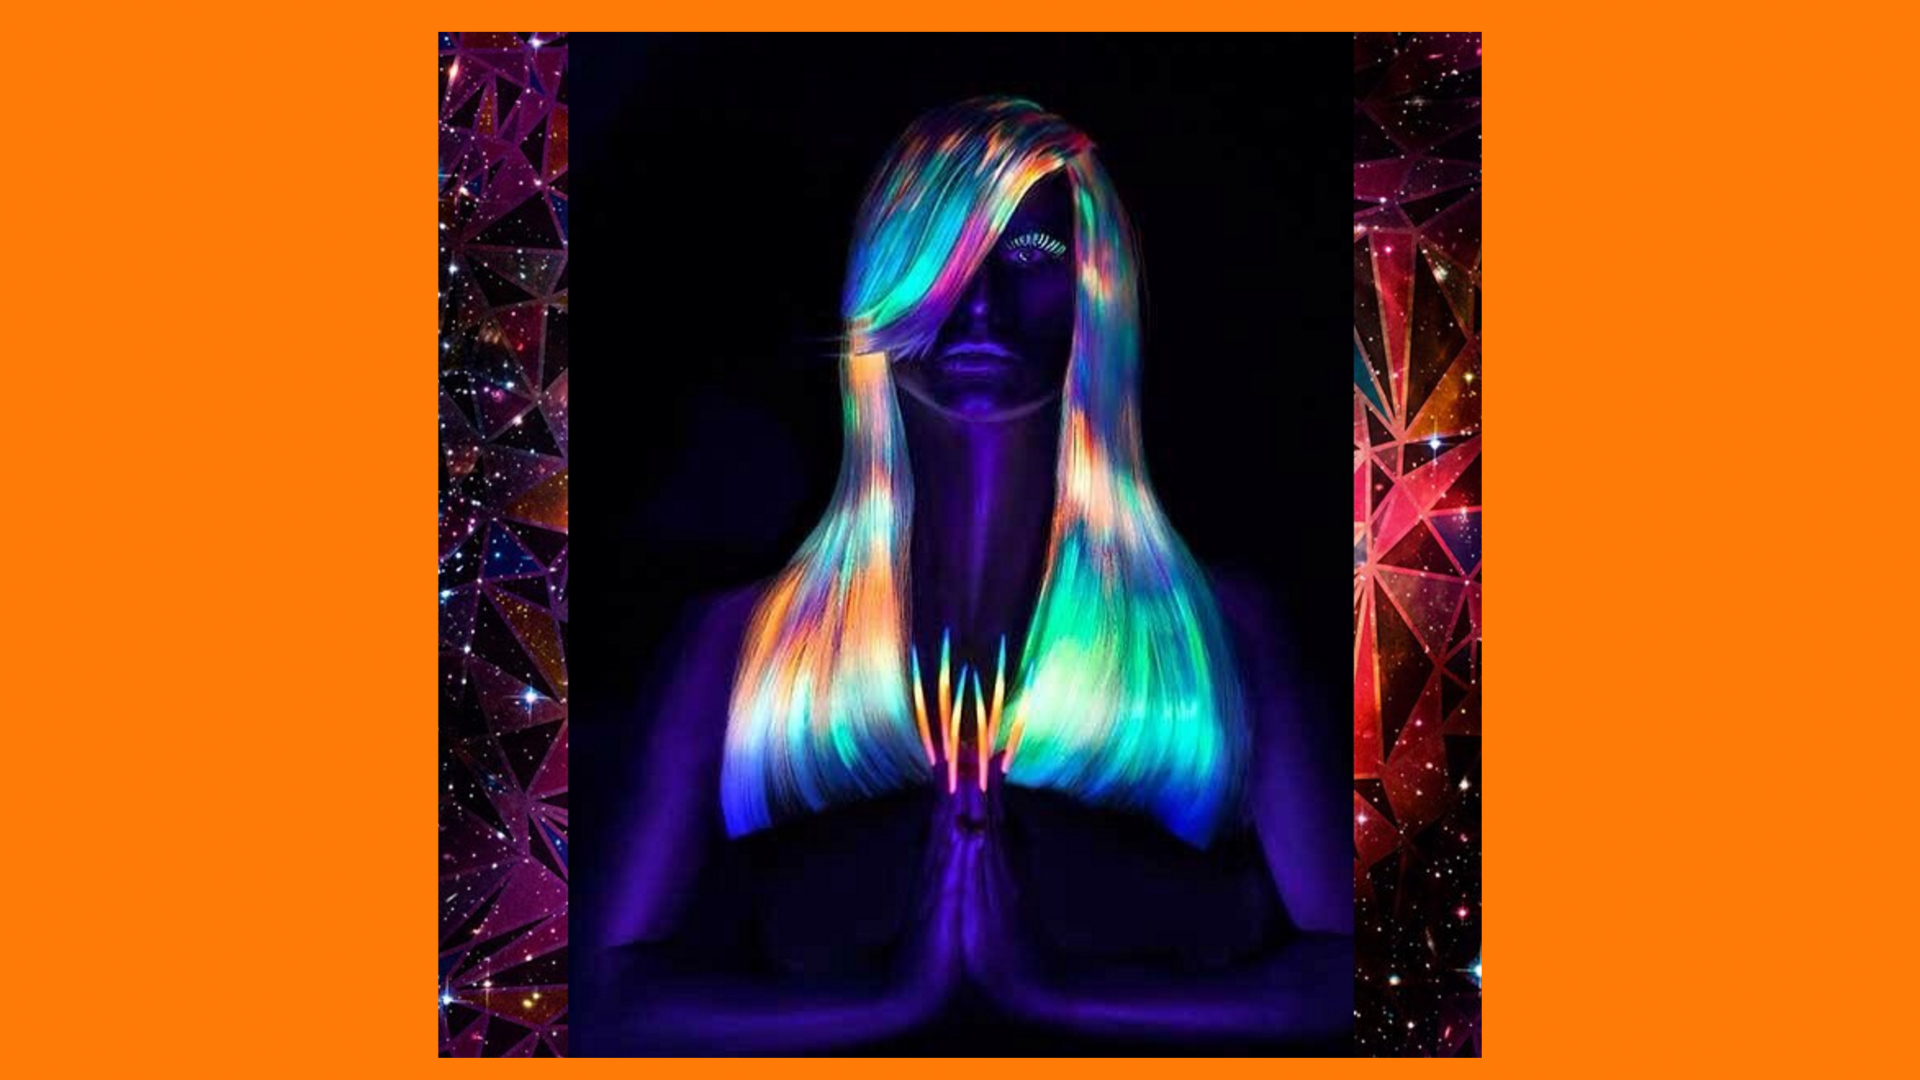 GLOW IN THE DARK HAIR?! Try It Out 